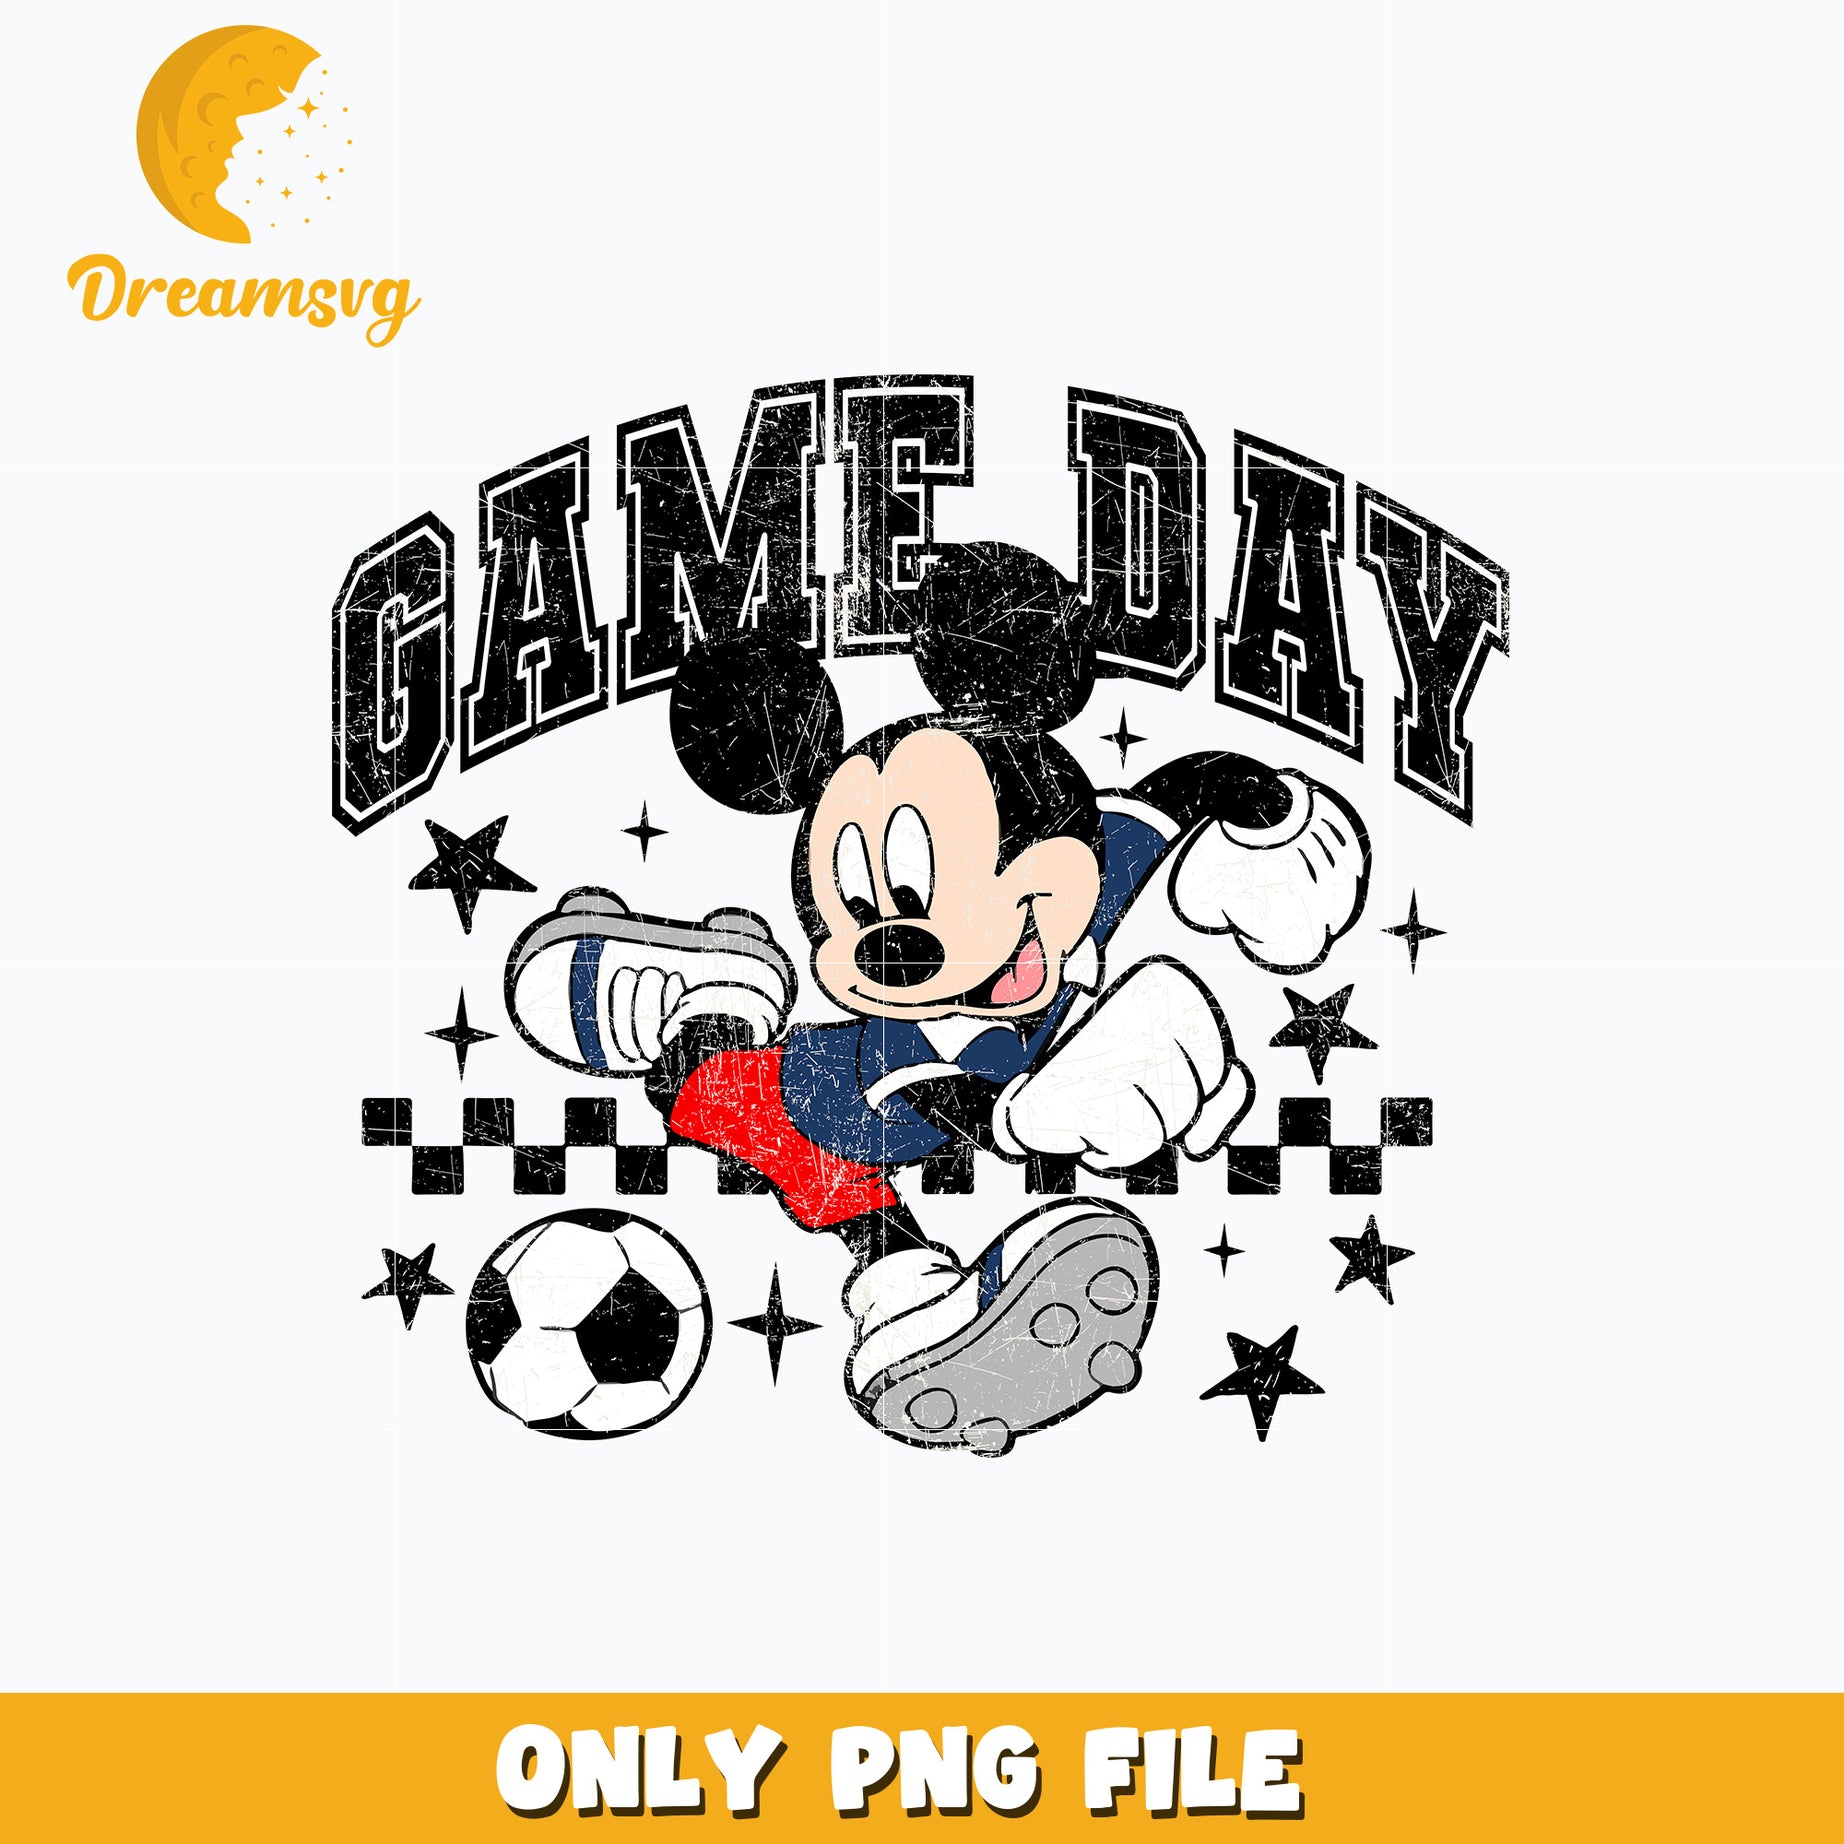 Mickey mouse game day soccer png